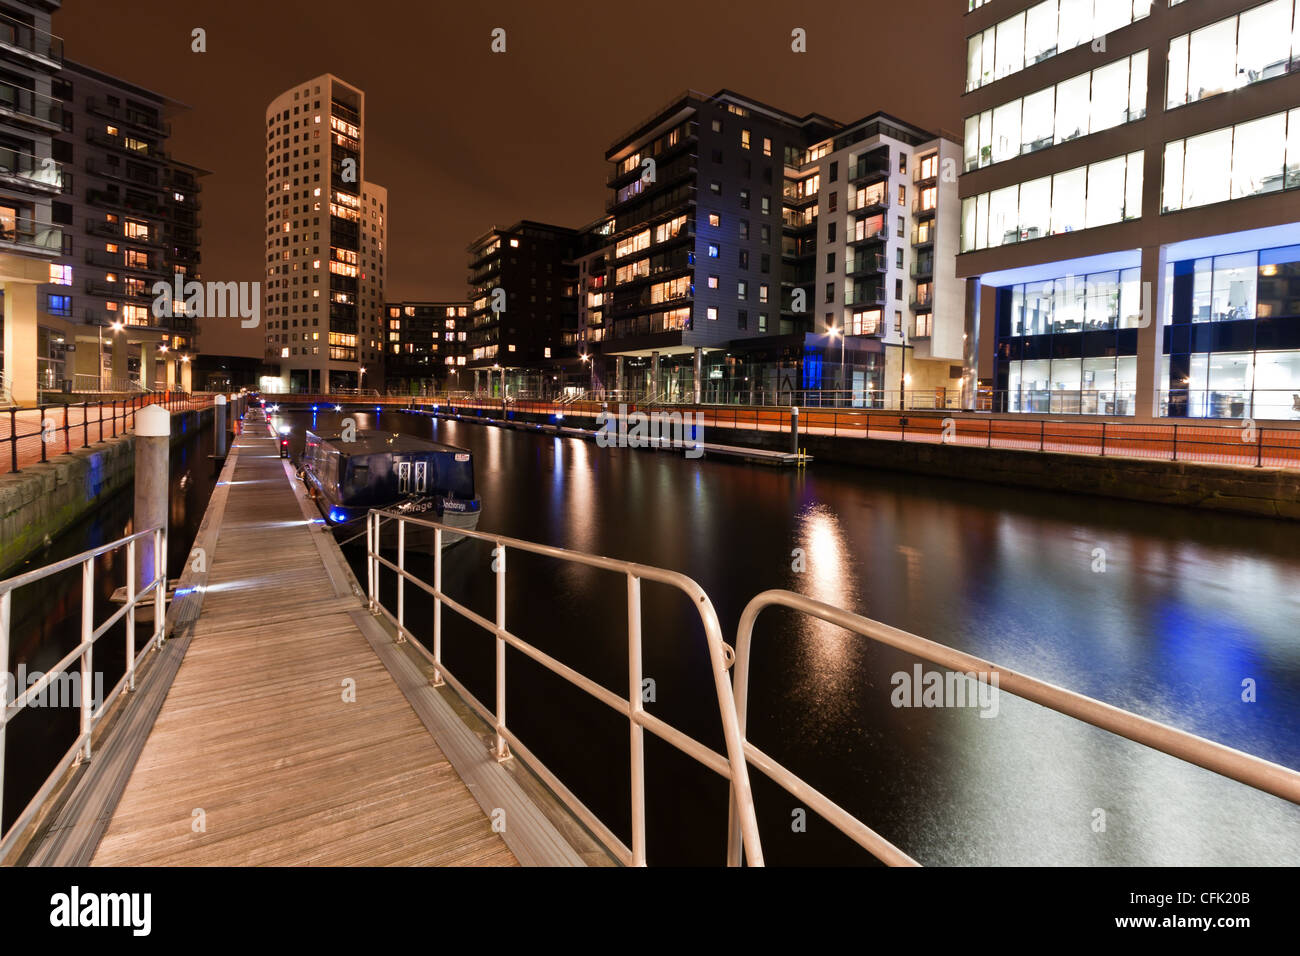 Il Royal Armouries dopo il buio, Clarence Dock a Leeds Foto Stock